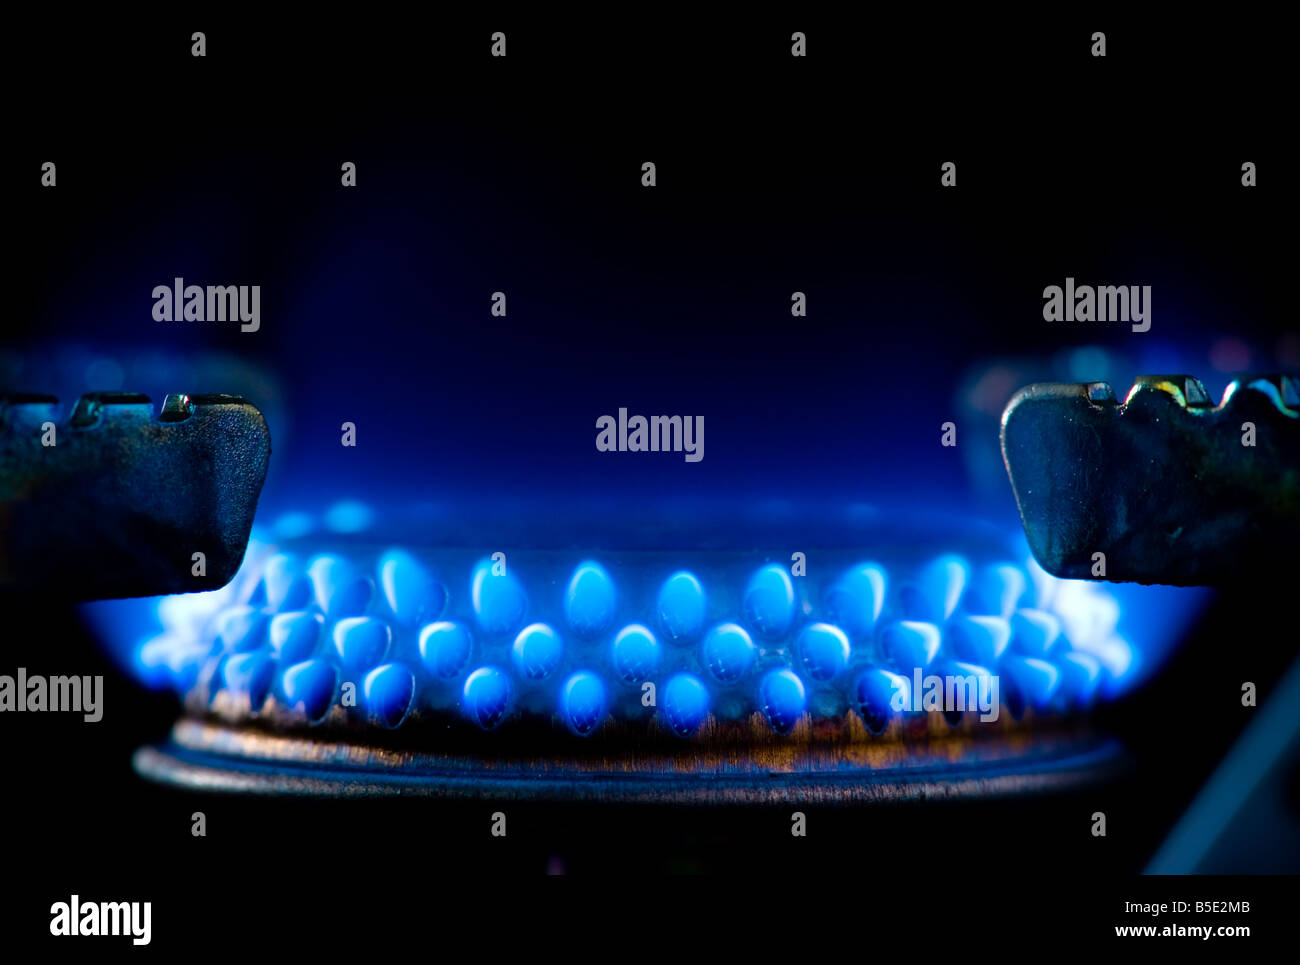 Closeup of blue gas flames on a domestic cooker, on a black background. Stock Photo